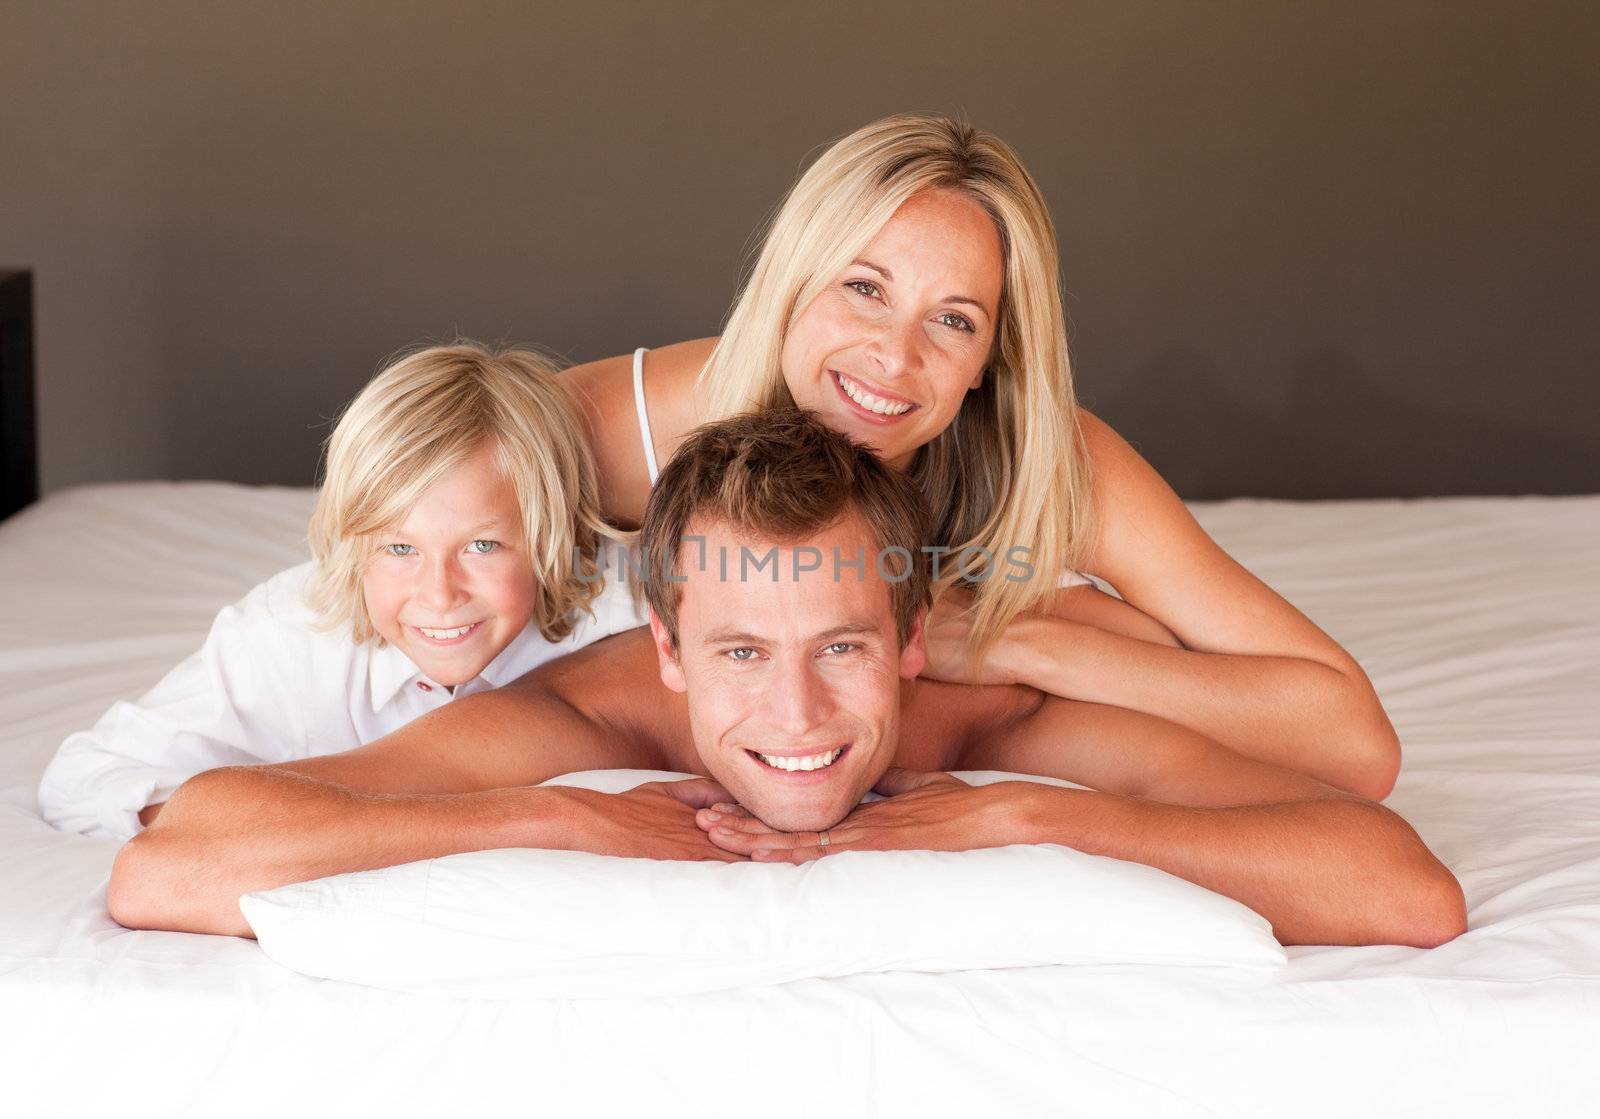 Cute couple and son enjoying together in bed at home